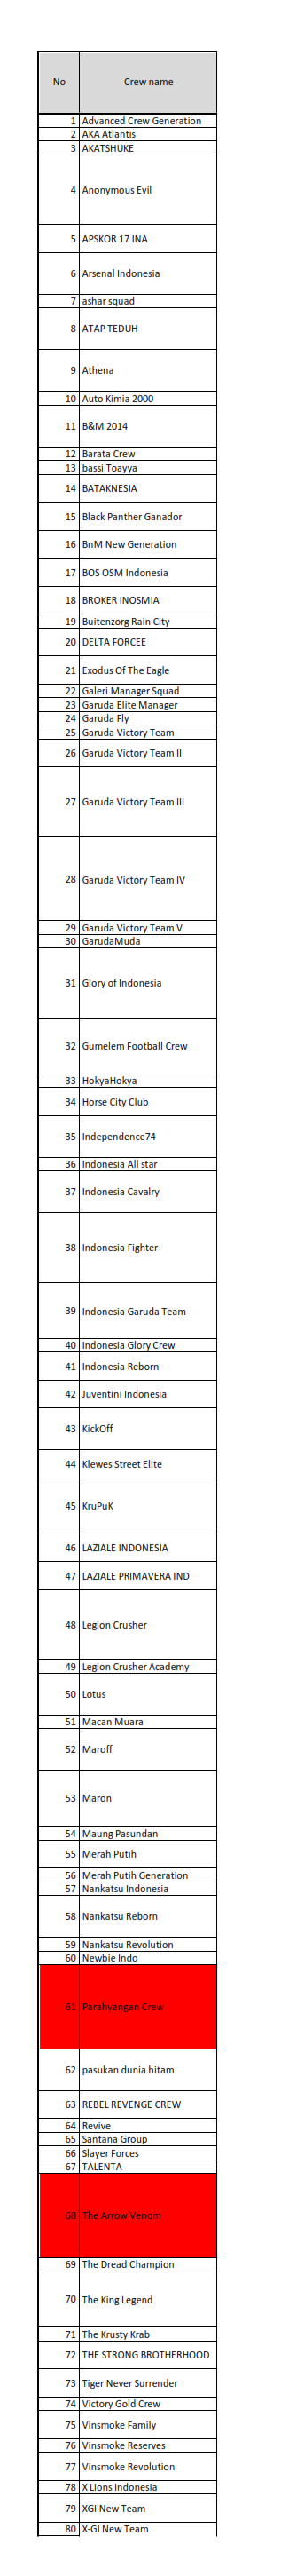 Daftar Crew Indonesia_new.png